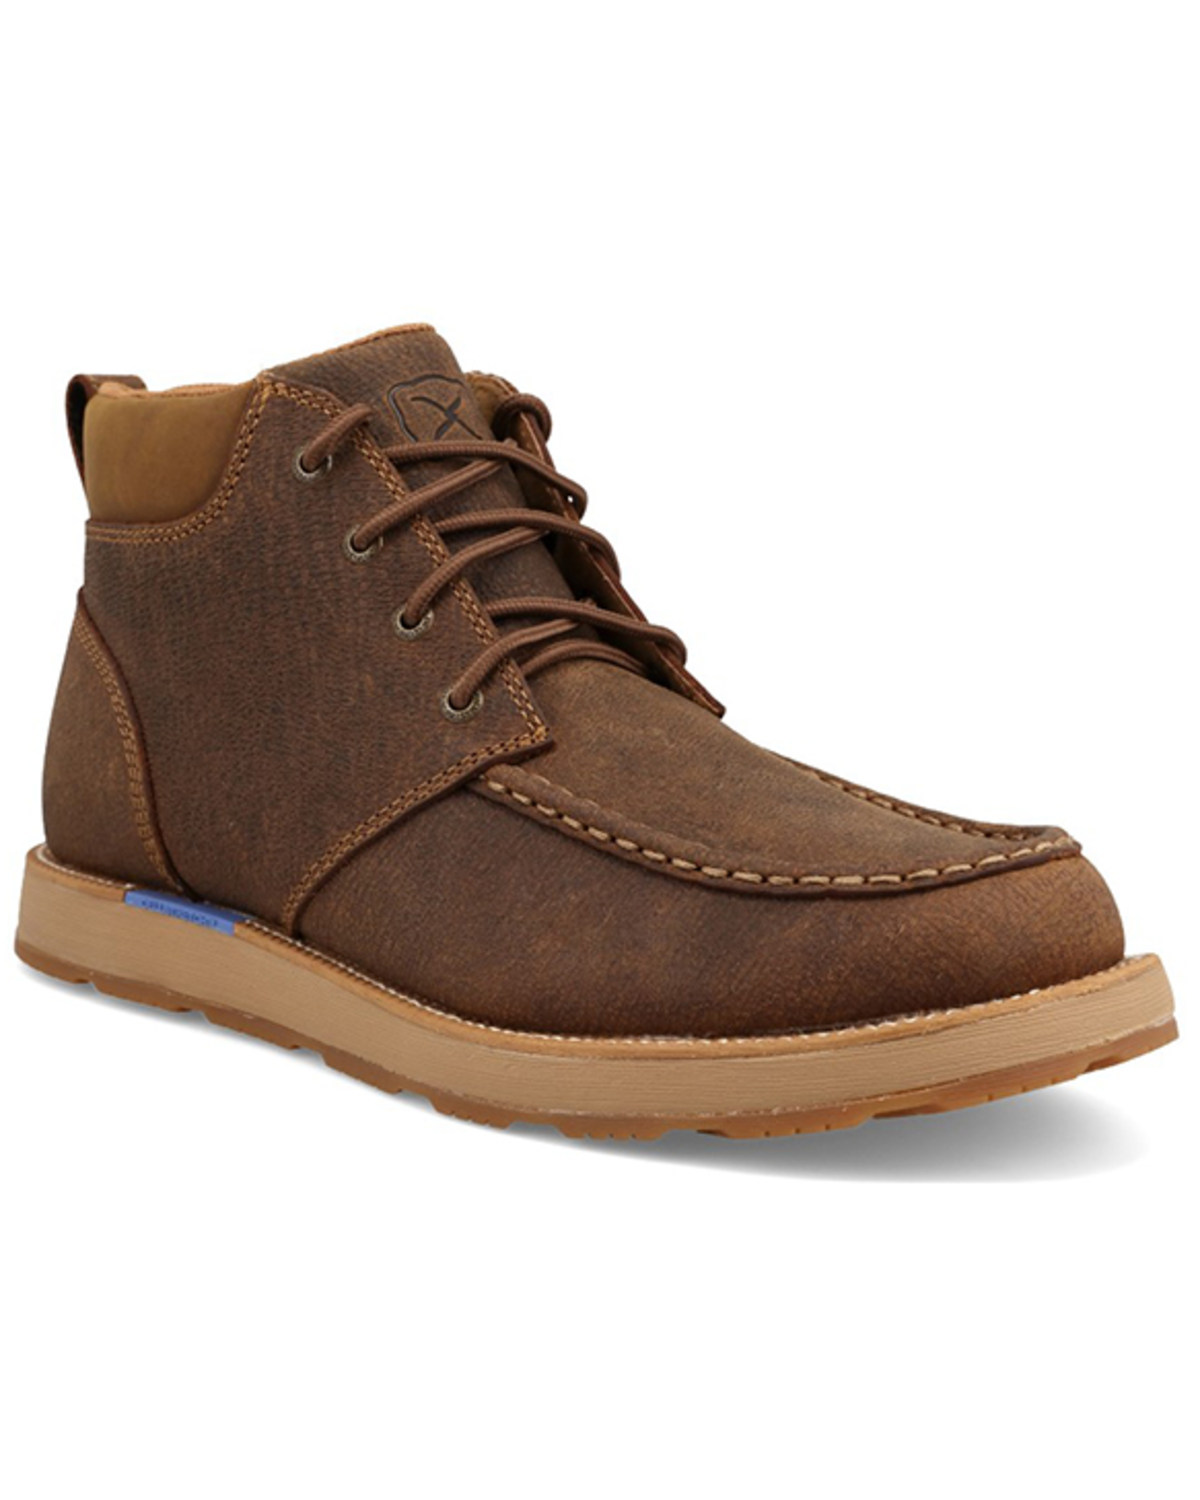 Twisted X Men's 6" CellStretch® Wedge Sole Casual Boots - Moc Toe